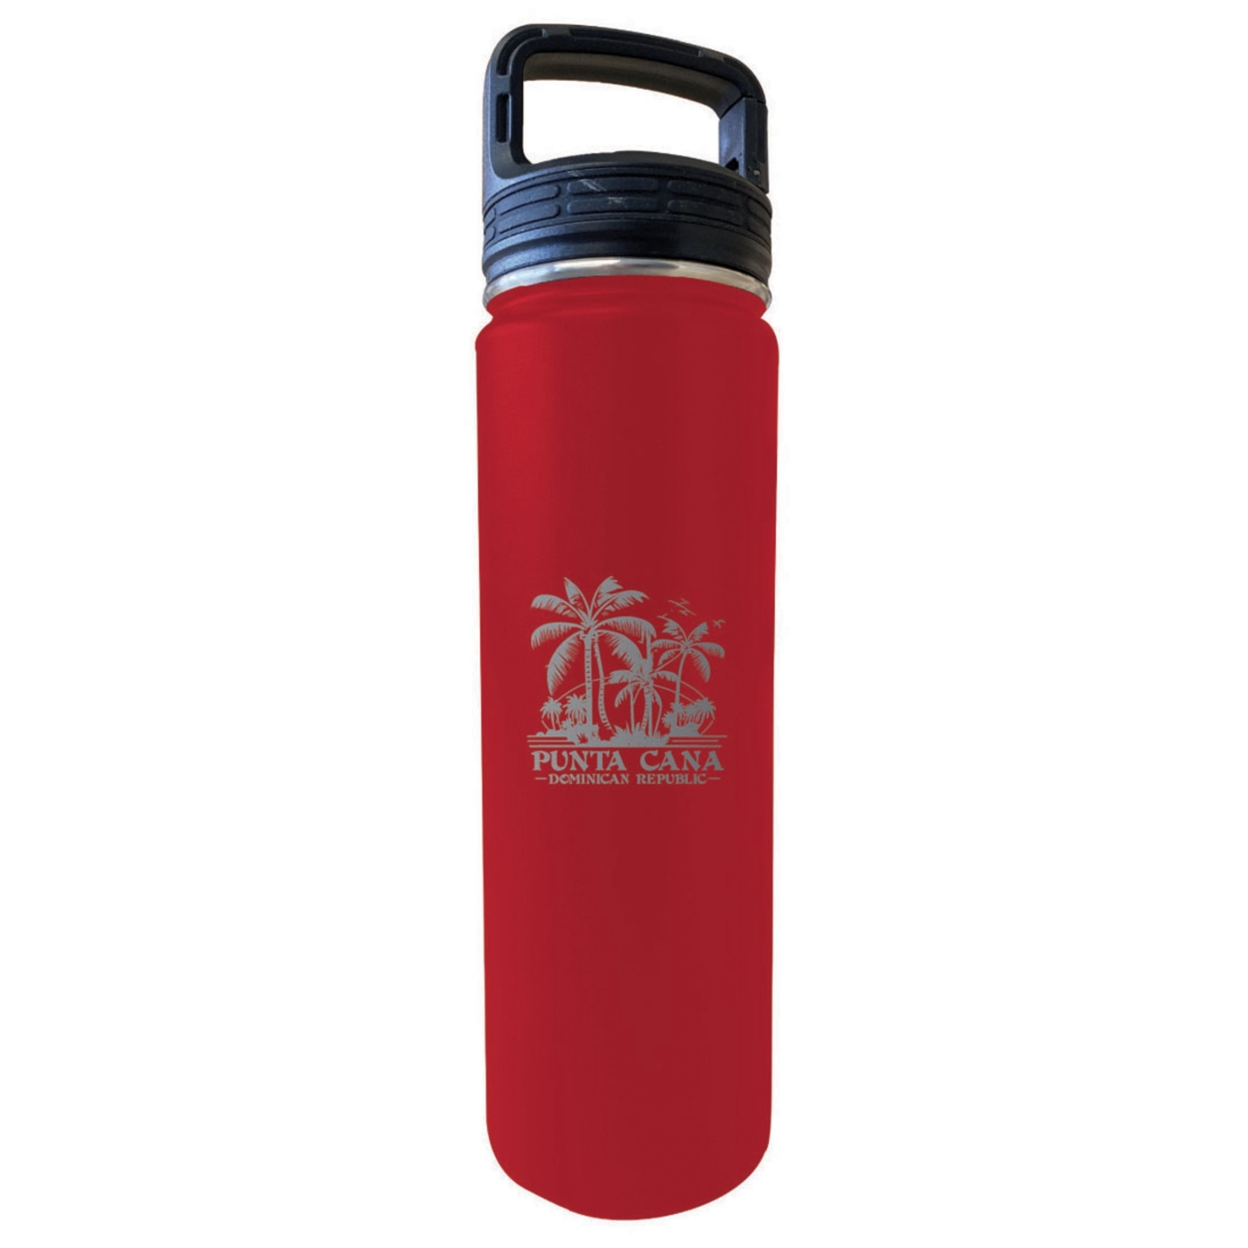 Punta Cana Dominican Republic Souvenir 32 Oz Insulated Stainless Steel Tumbler - White, Parrot 2